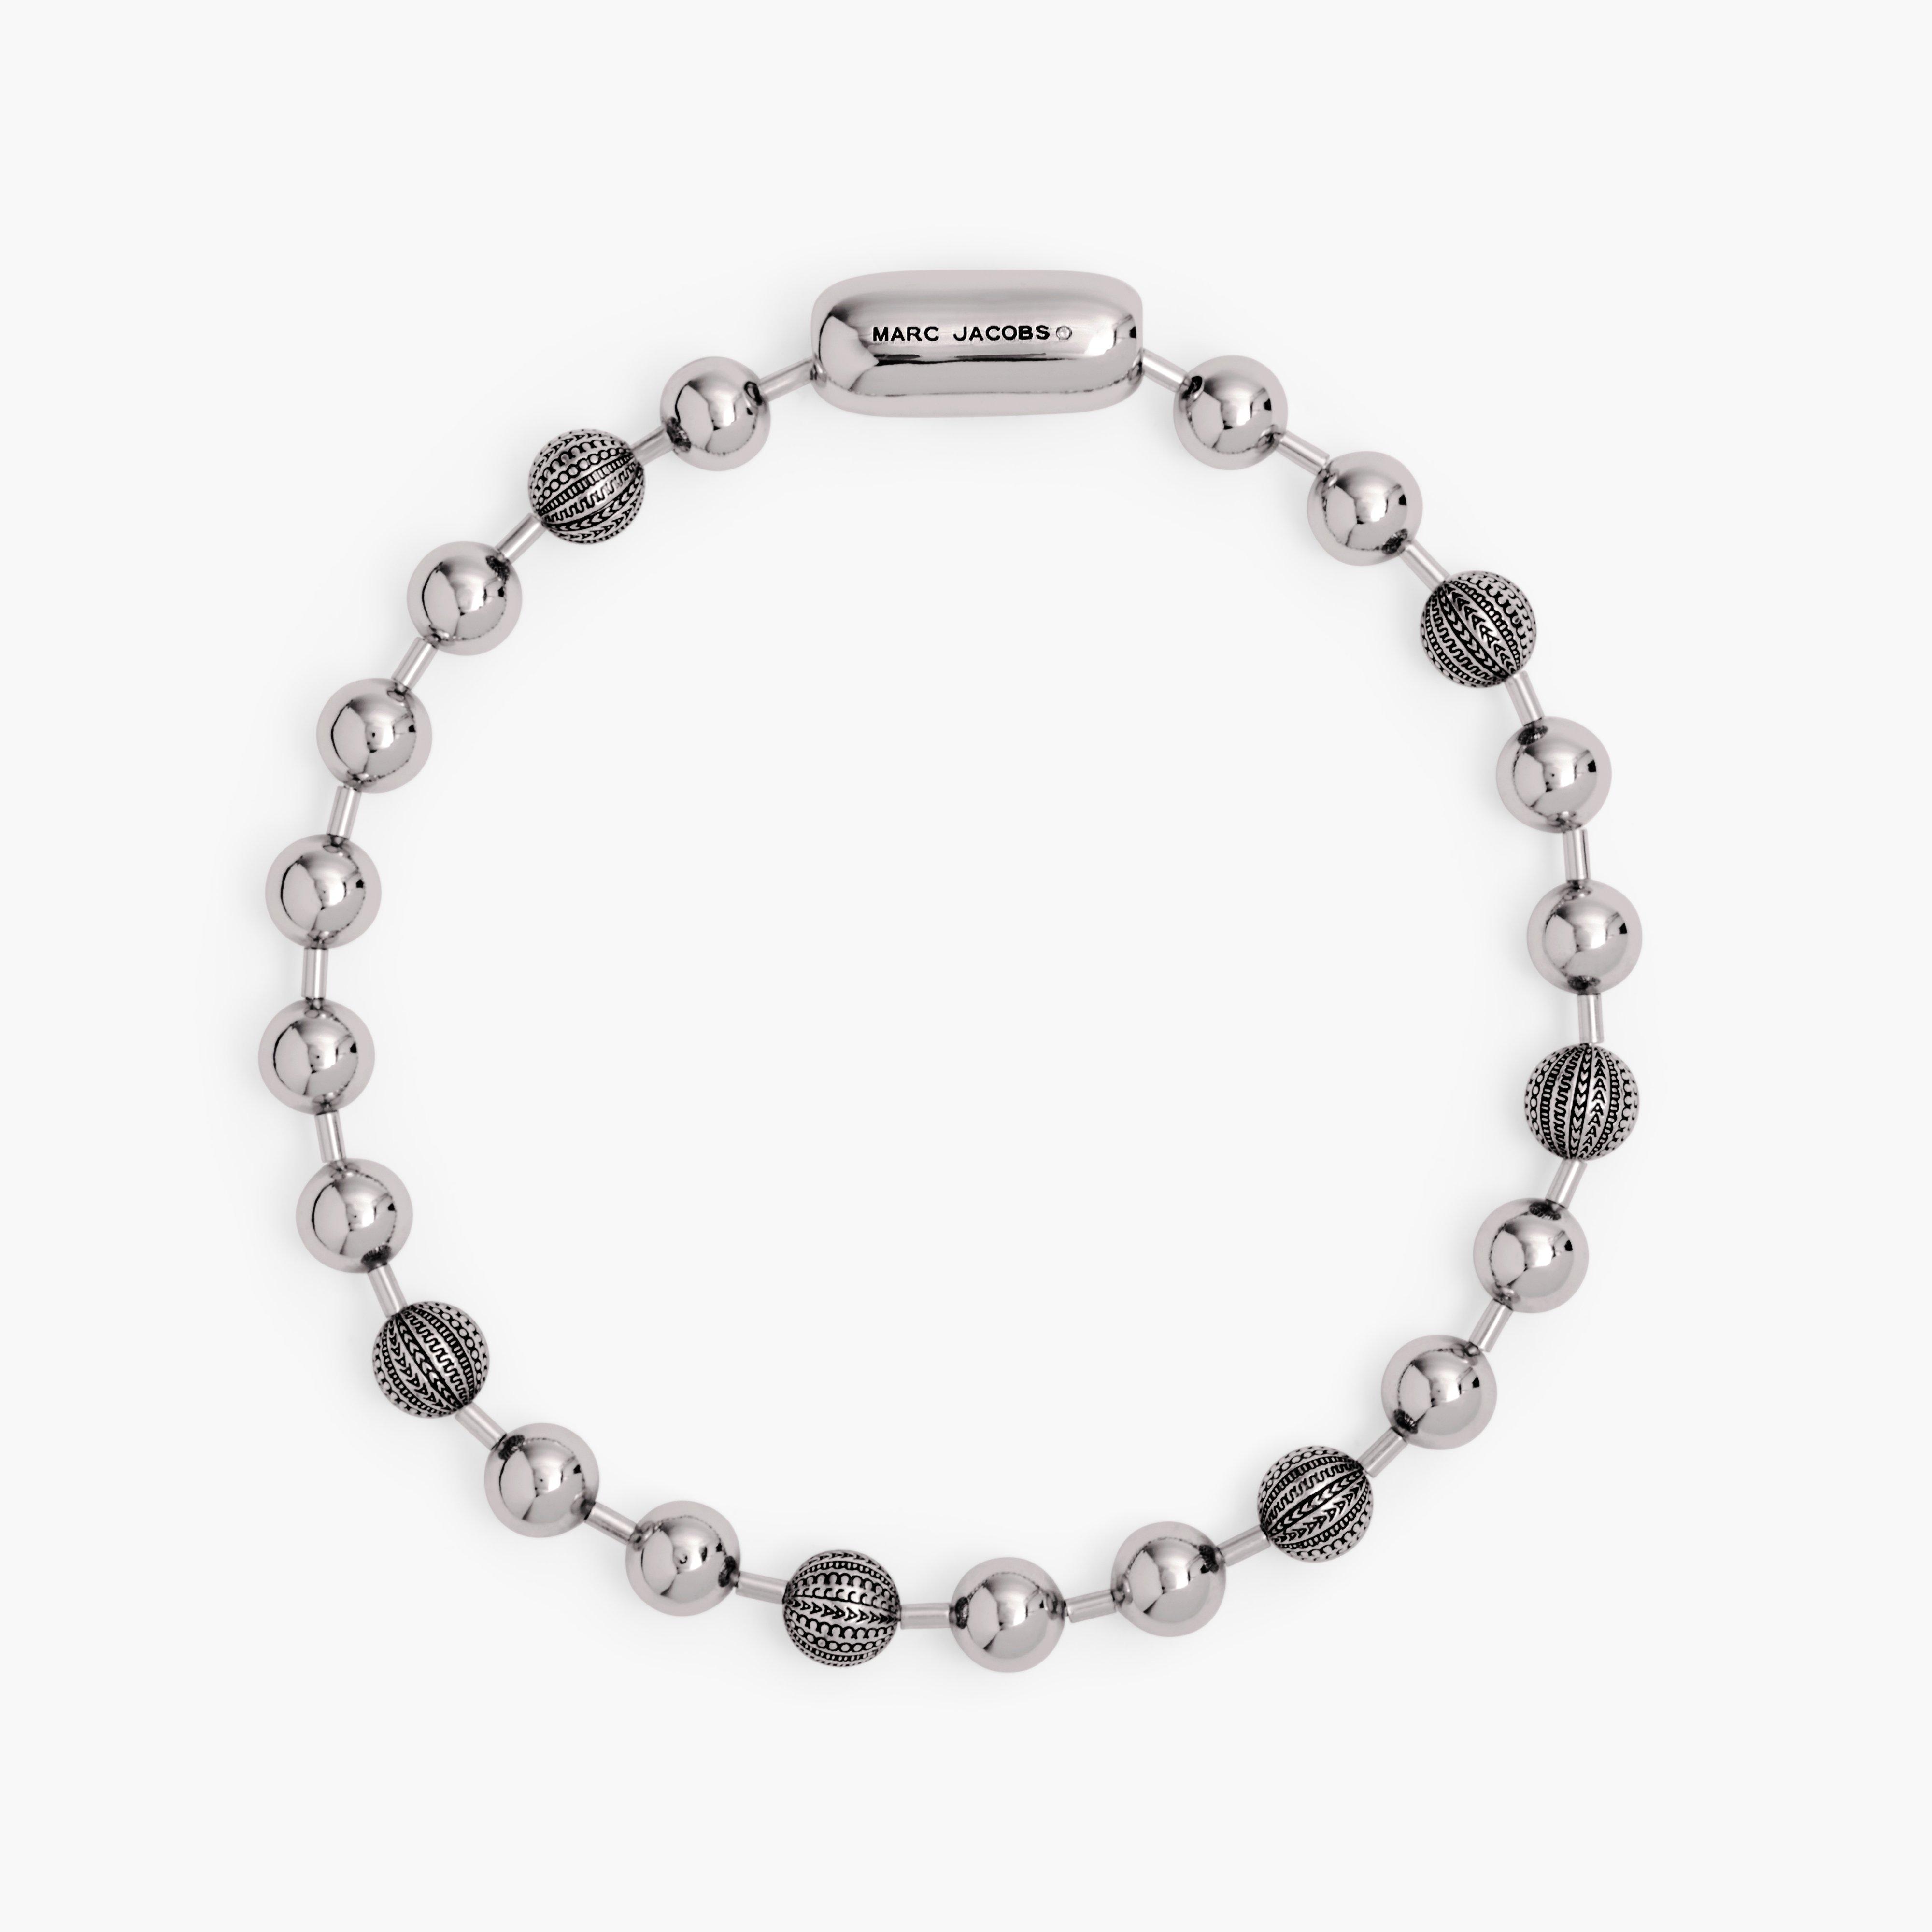 Marc by Marc jacobs The Monogram Ball Chain Necklace,LIGHT ANTIQUE SILVER